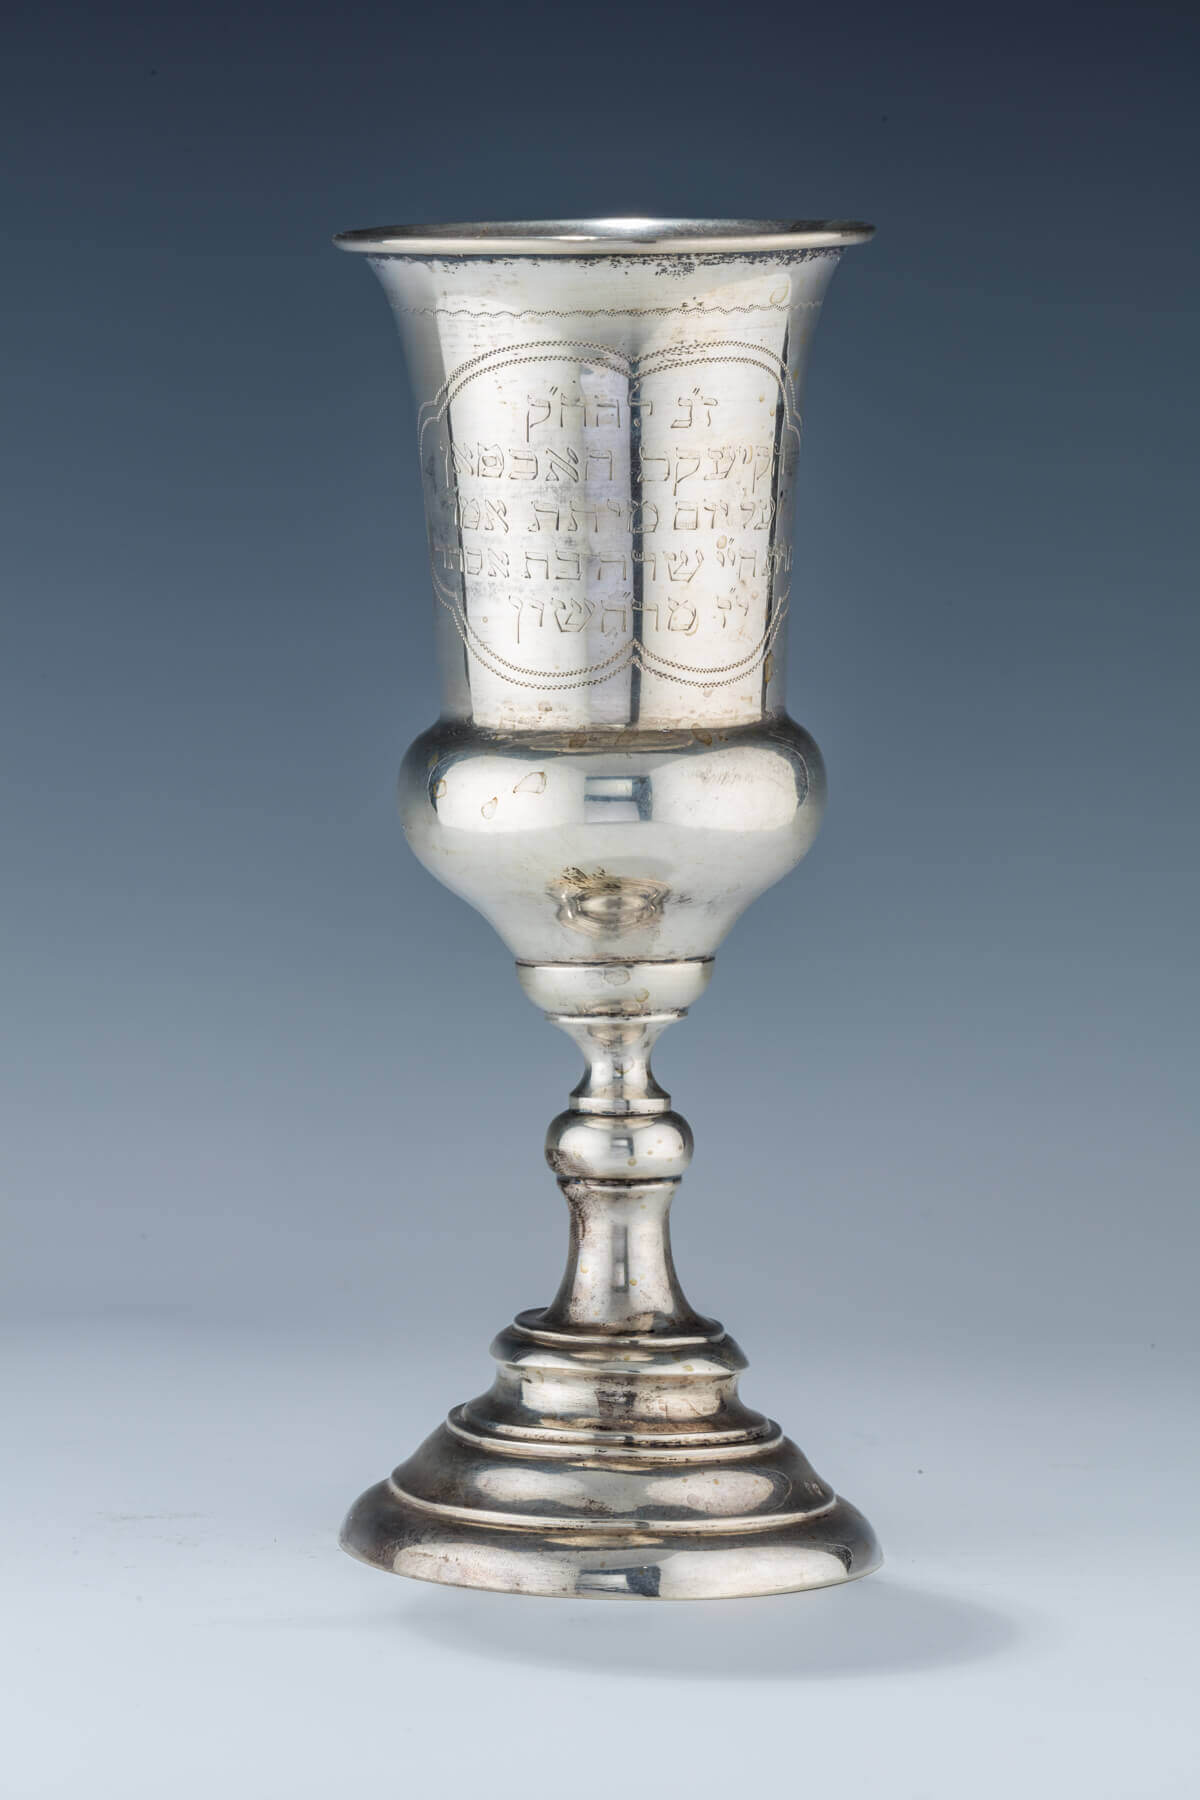 011. A LARGE BURIAL SOCIETY RELATED KIDDUSH GOBLET